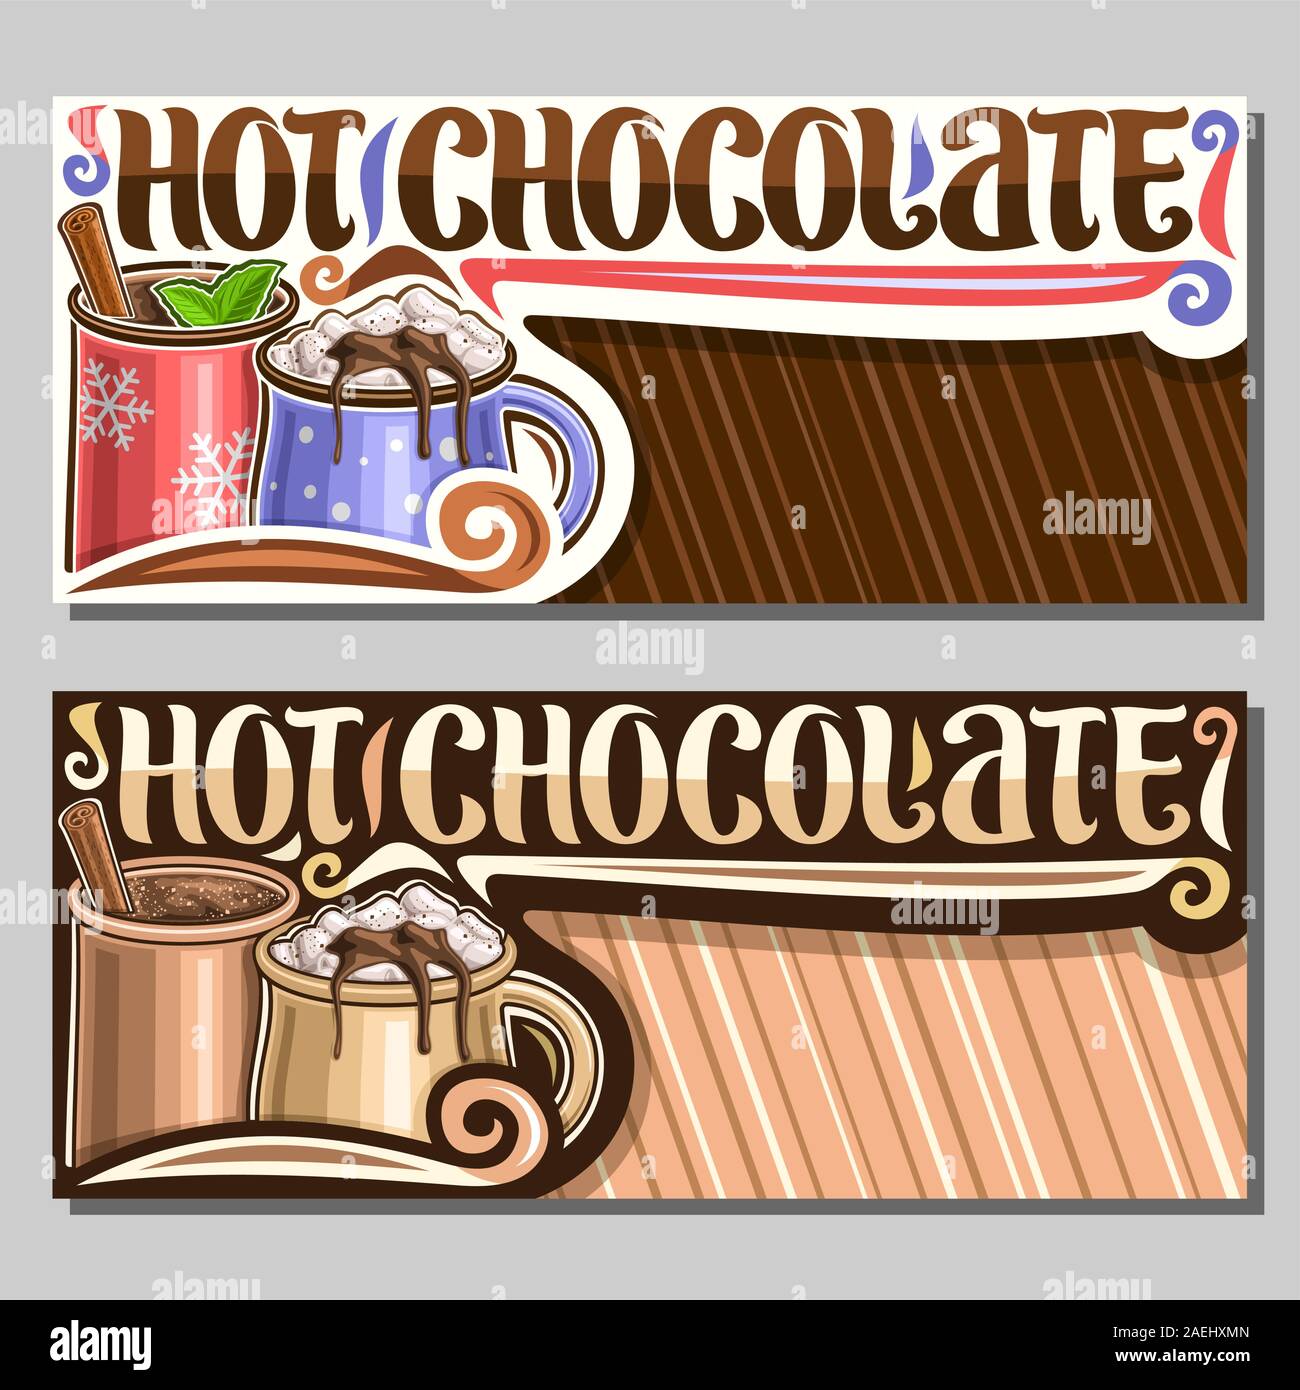 https://c8.alamy.com/comp/2AEHXMN/vector-layouts-for-hot-chocolate-with-copy-space-card-with-2-metal-cups-of-warm-christmas-dessert-dripping-melted-chocolate-brush-lettering-for-wor-2AEHXMN.jpg